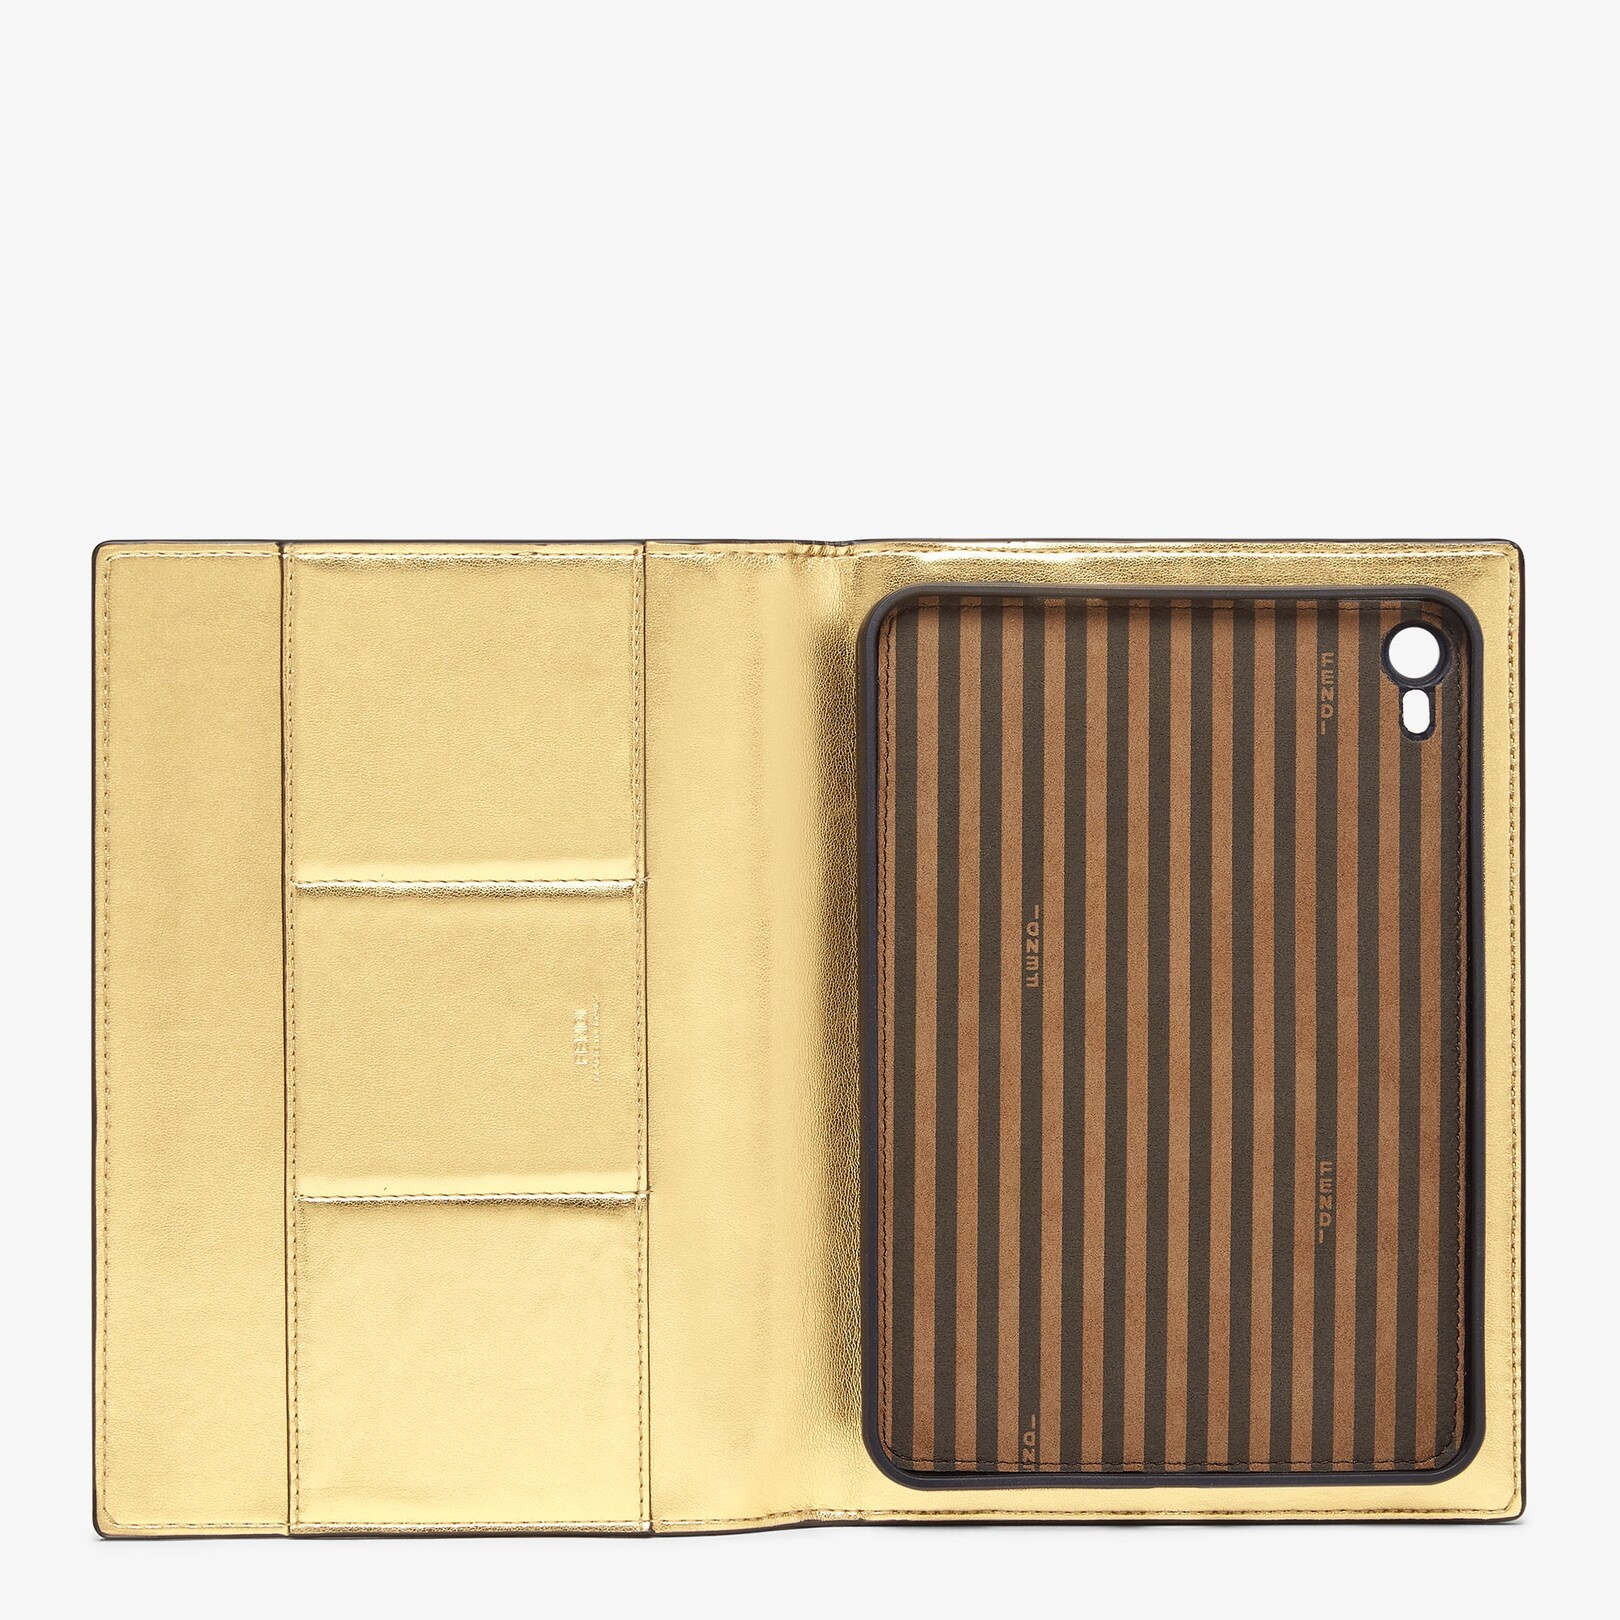 Gold-colored nappa leather case - 3